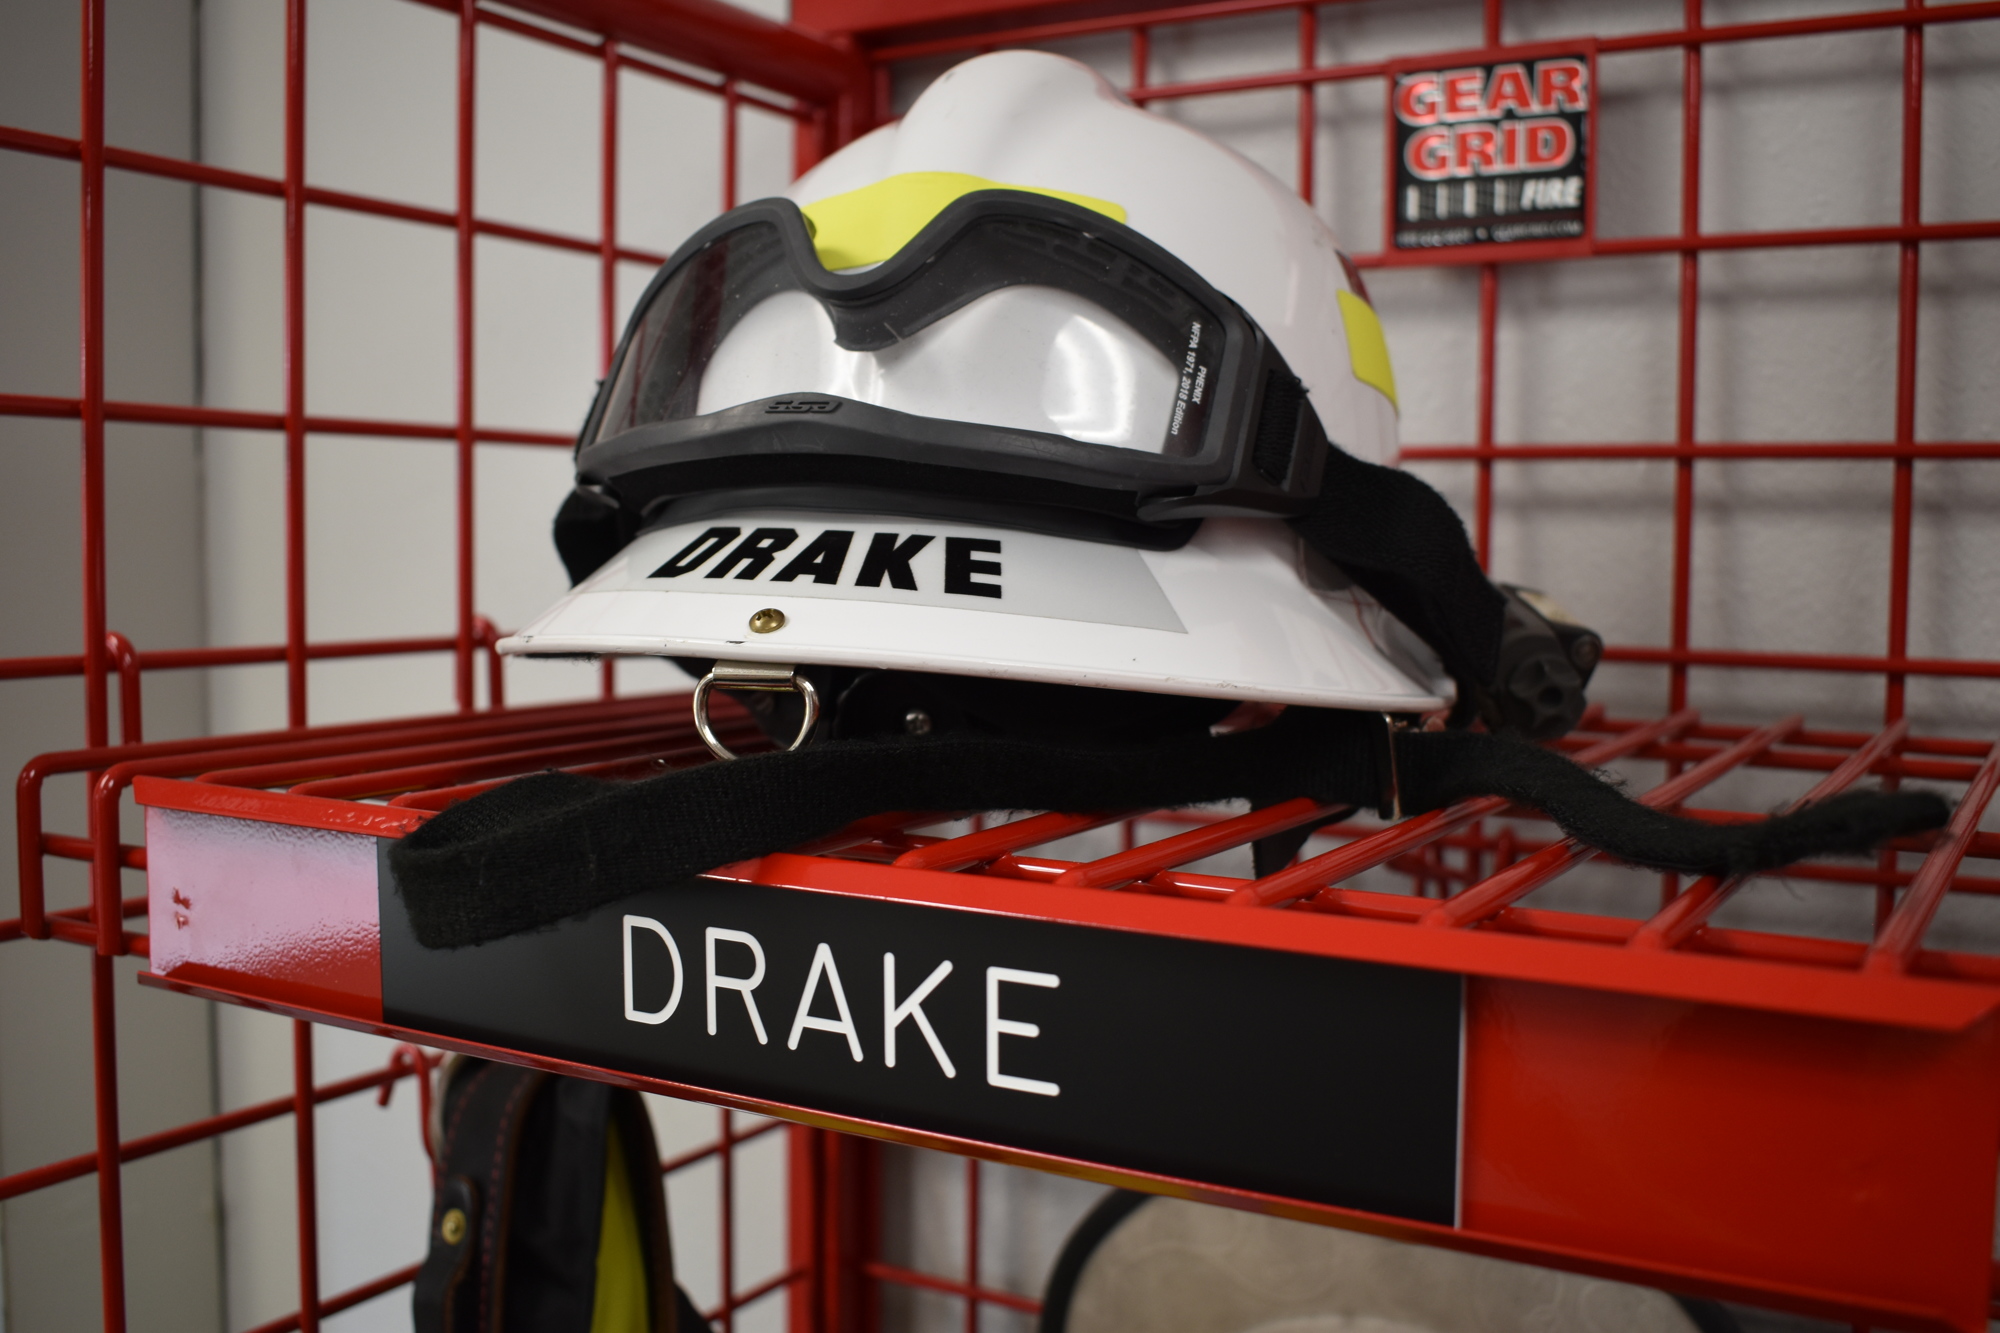 Each firefighter has an area marked with a nameplate to store individual equipment.